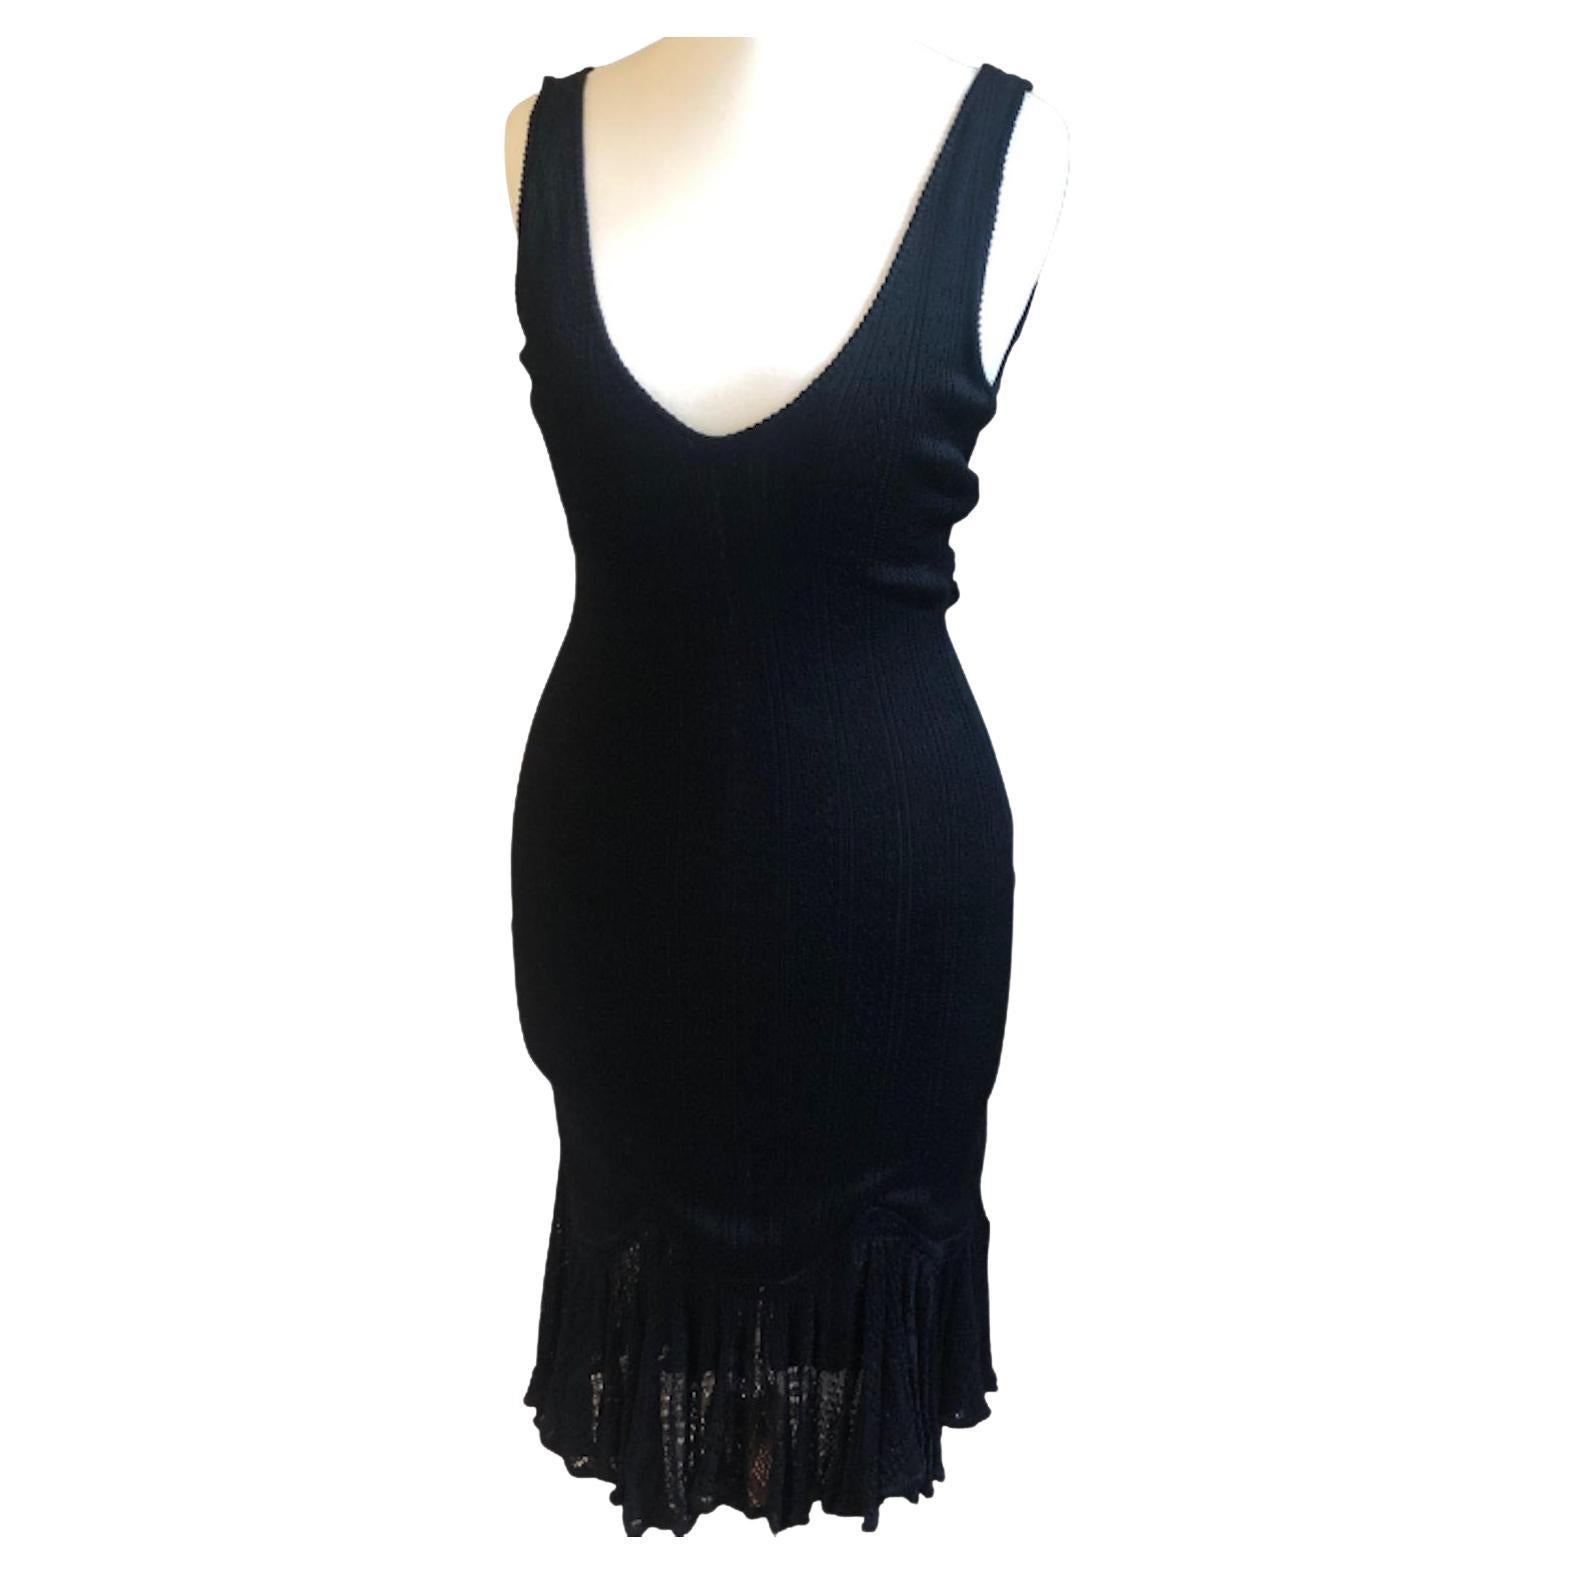 JOHN GALLIANO Black Knitted Lace Evening Mid Length Dress C.1998 For Sale